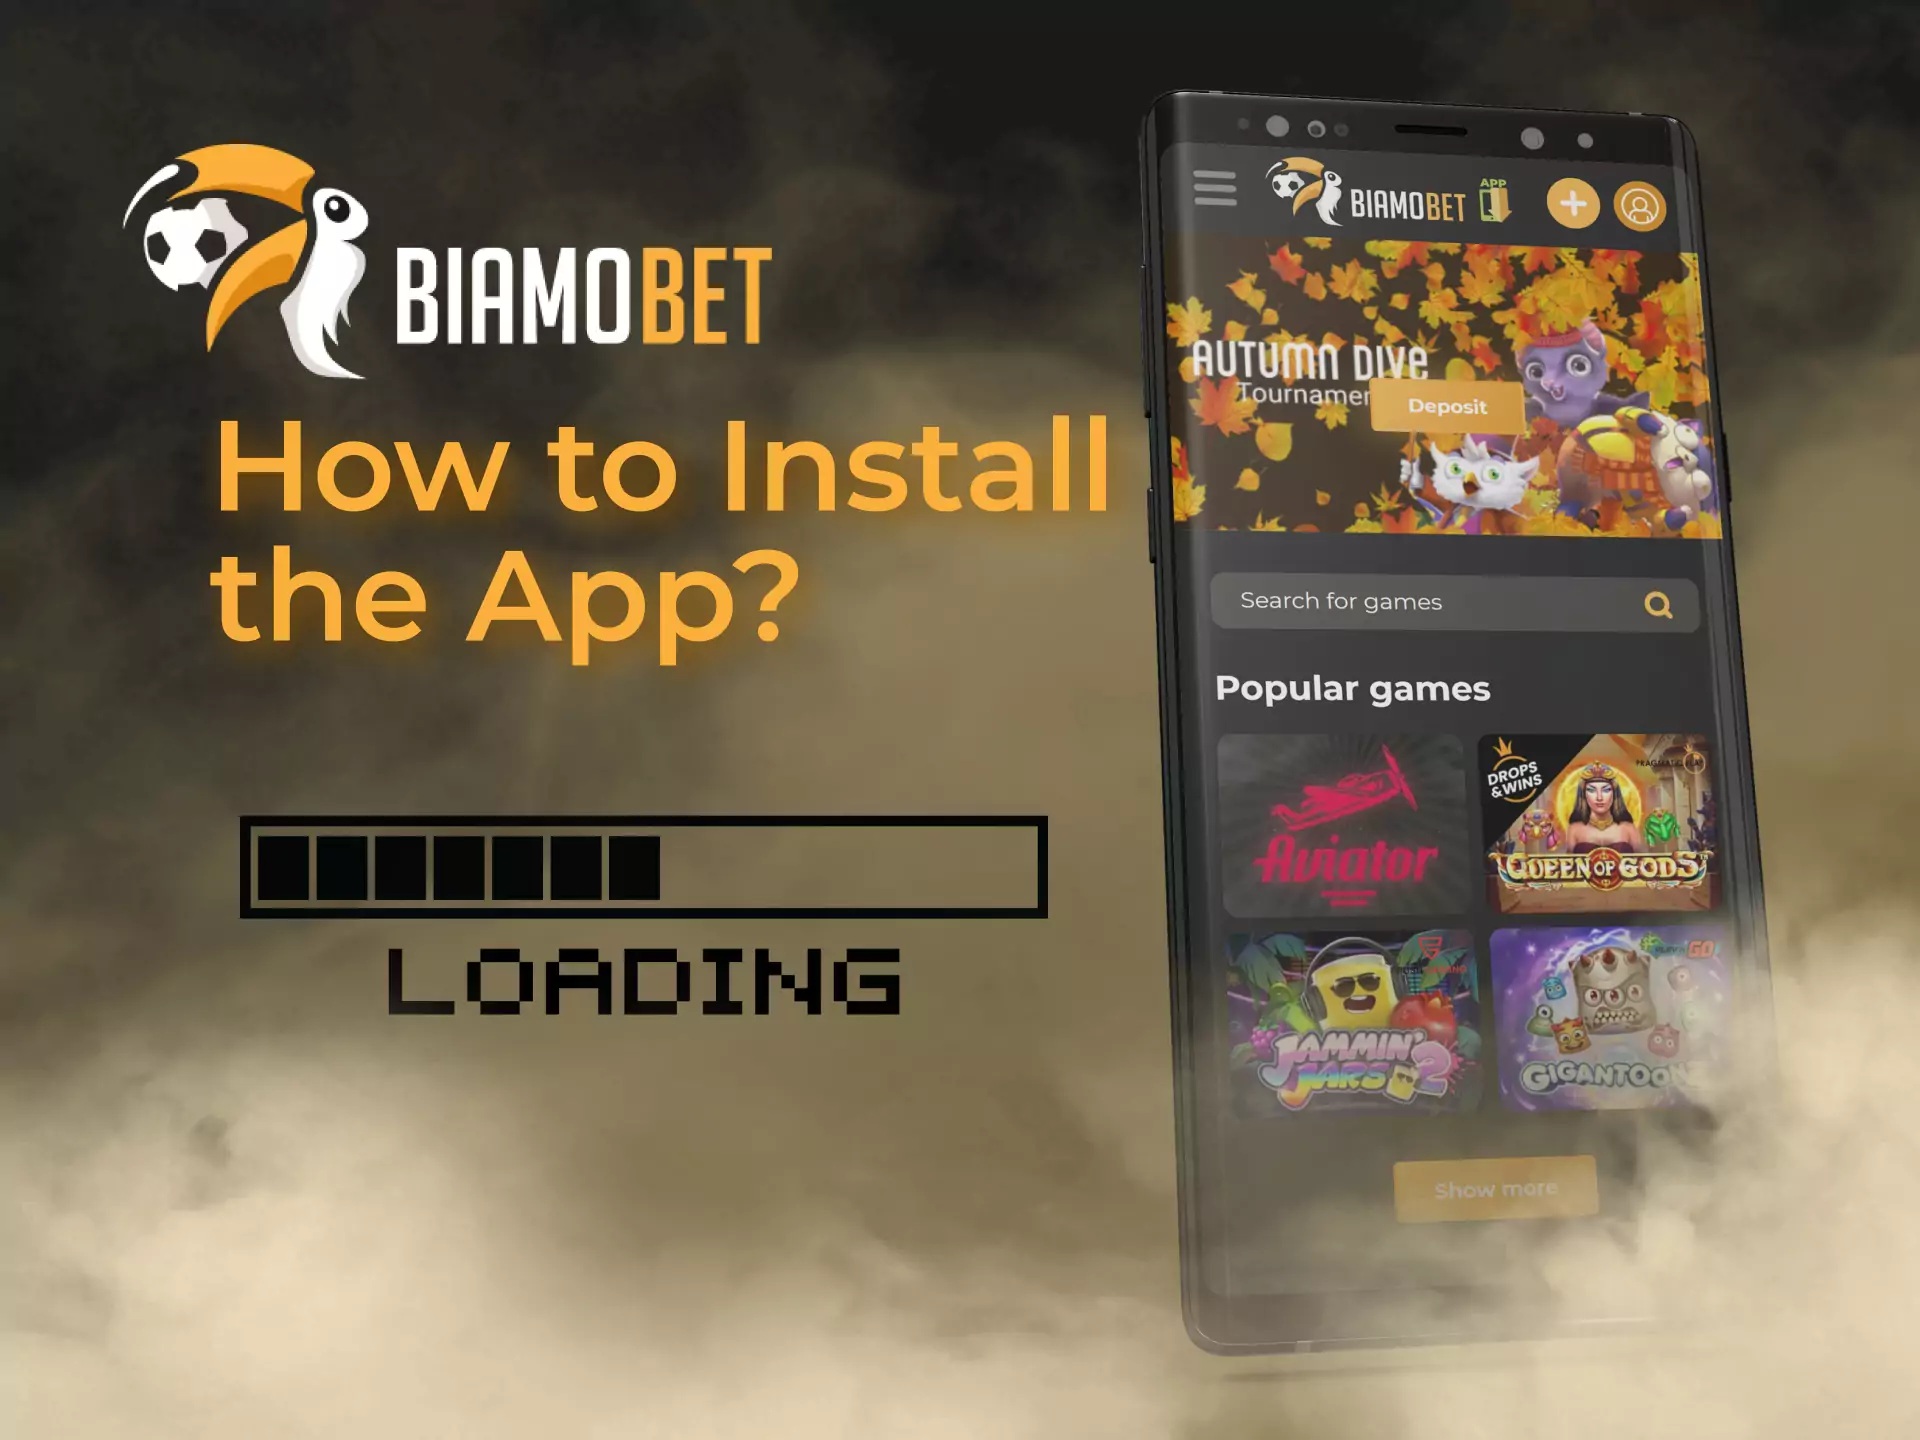 After you download the apk file, run it to start the installation of the Biamobet app.